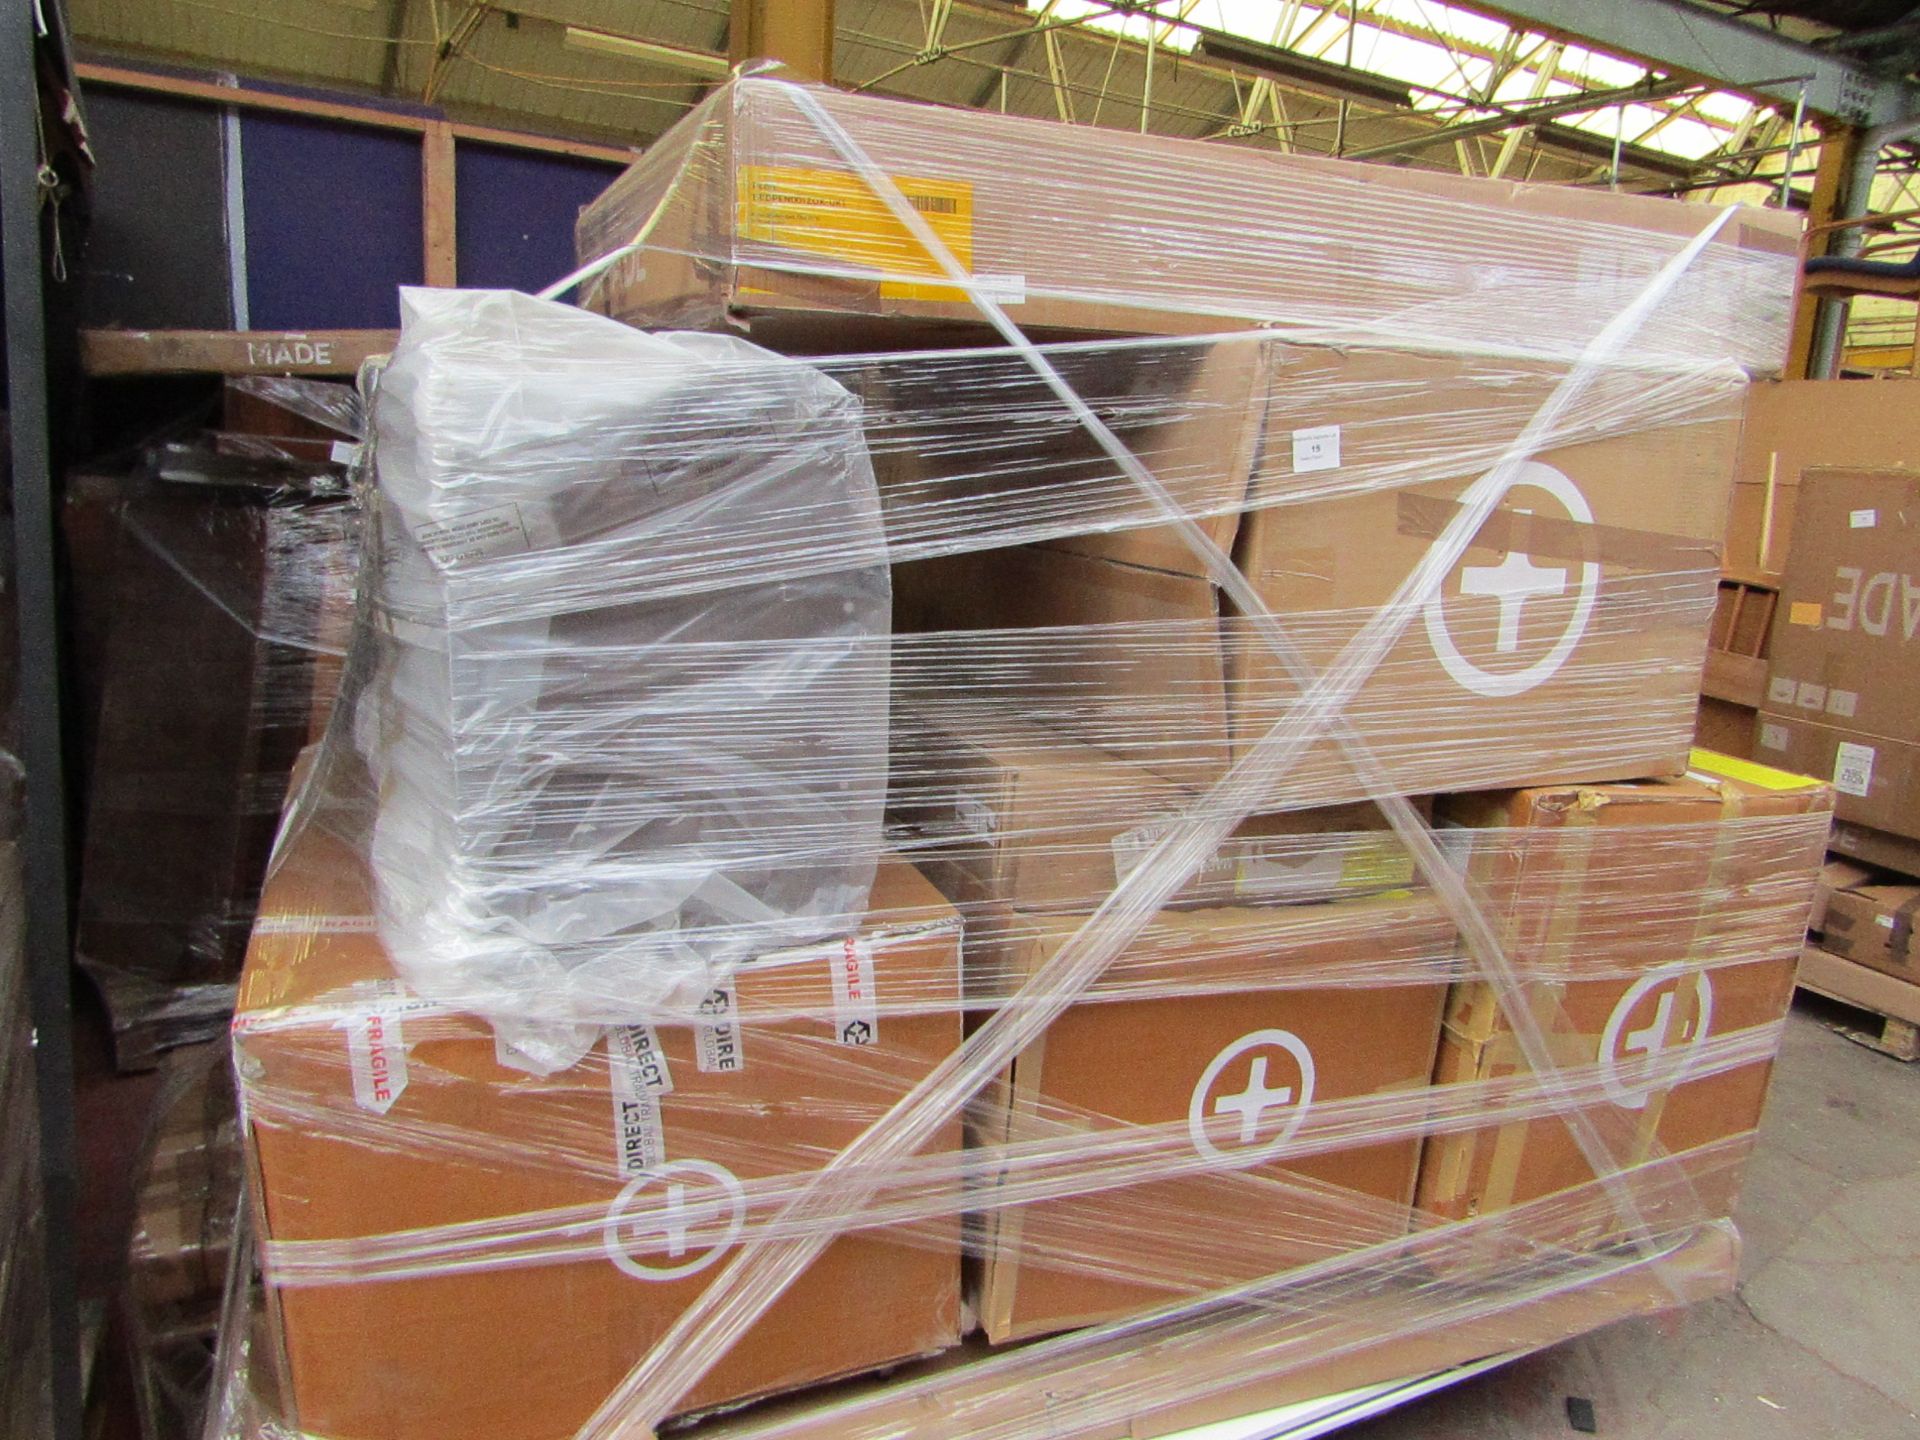 | 1x | PALLET OF COMPLETELY RAW MADE.COM RETURNS THE MANIFEST IS BELOW, PLEASE NOTE THE MANIFEST MAY